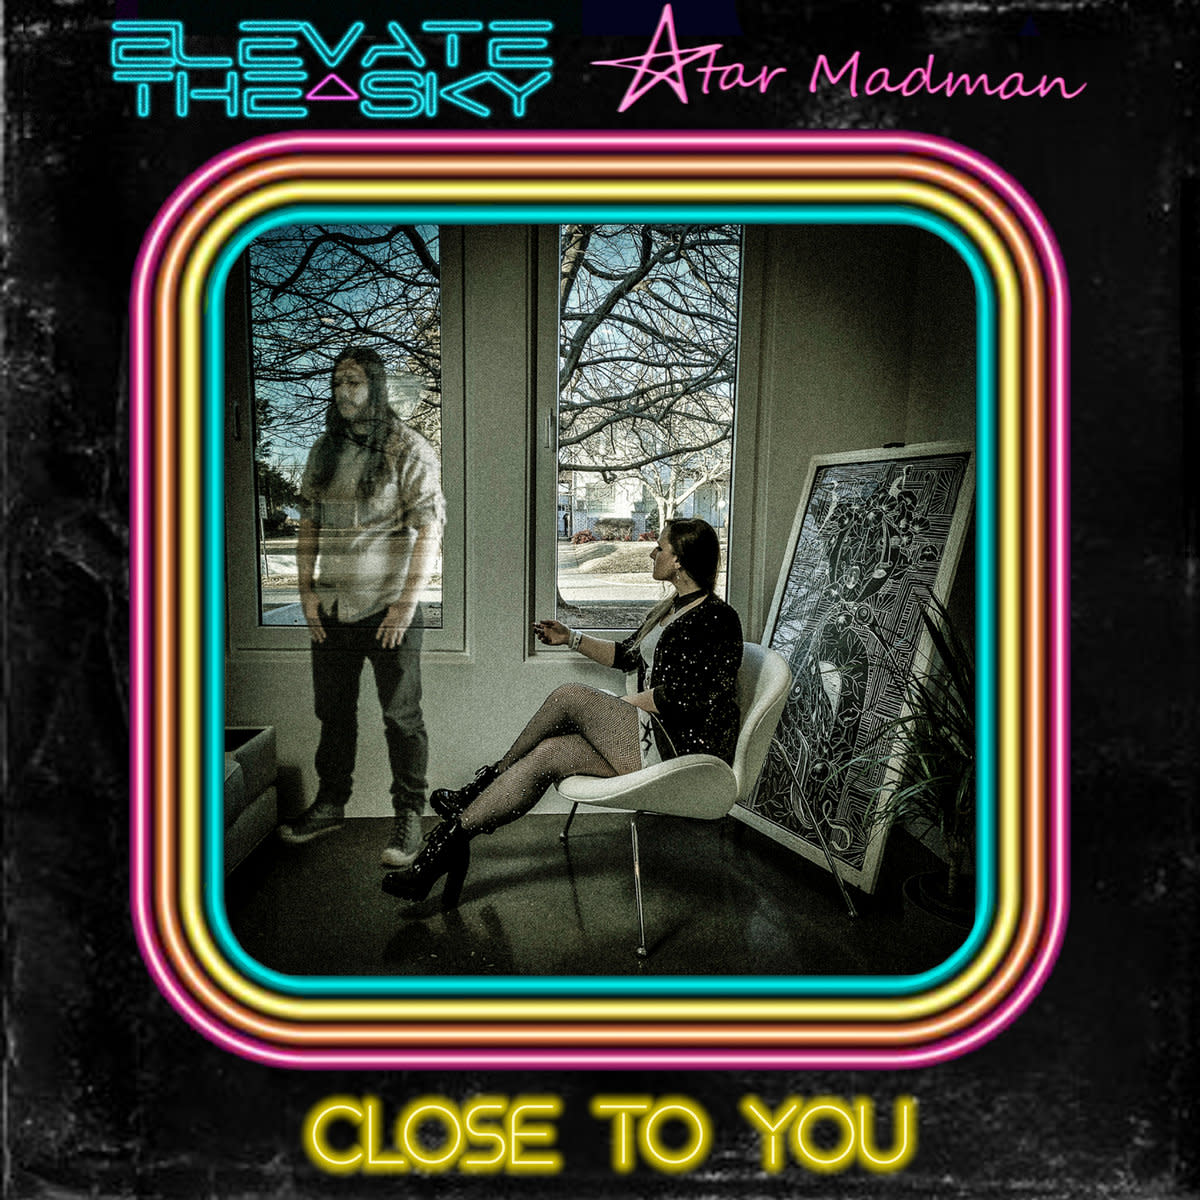 synth-single-review-close-to-you-by-elevate-the-sky-starmadman